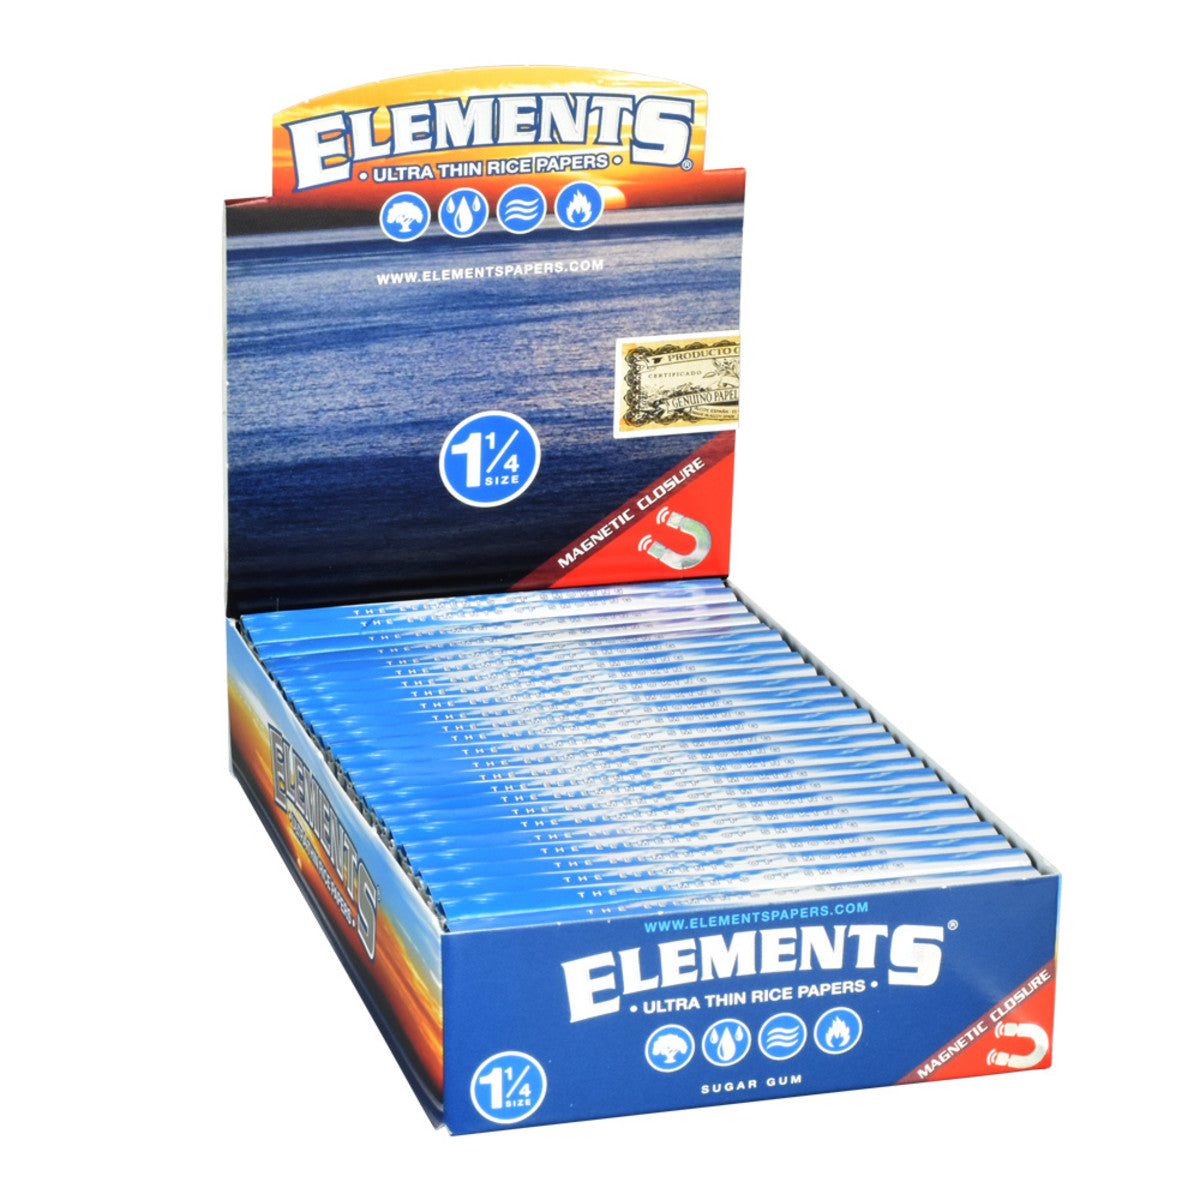 elements ultra thin rice rolling papers box 1.25"